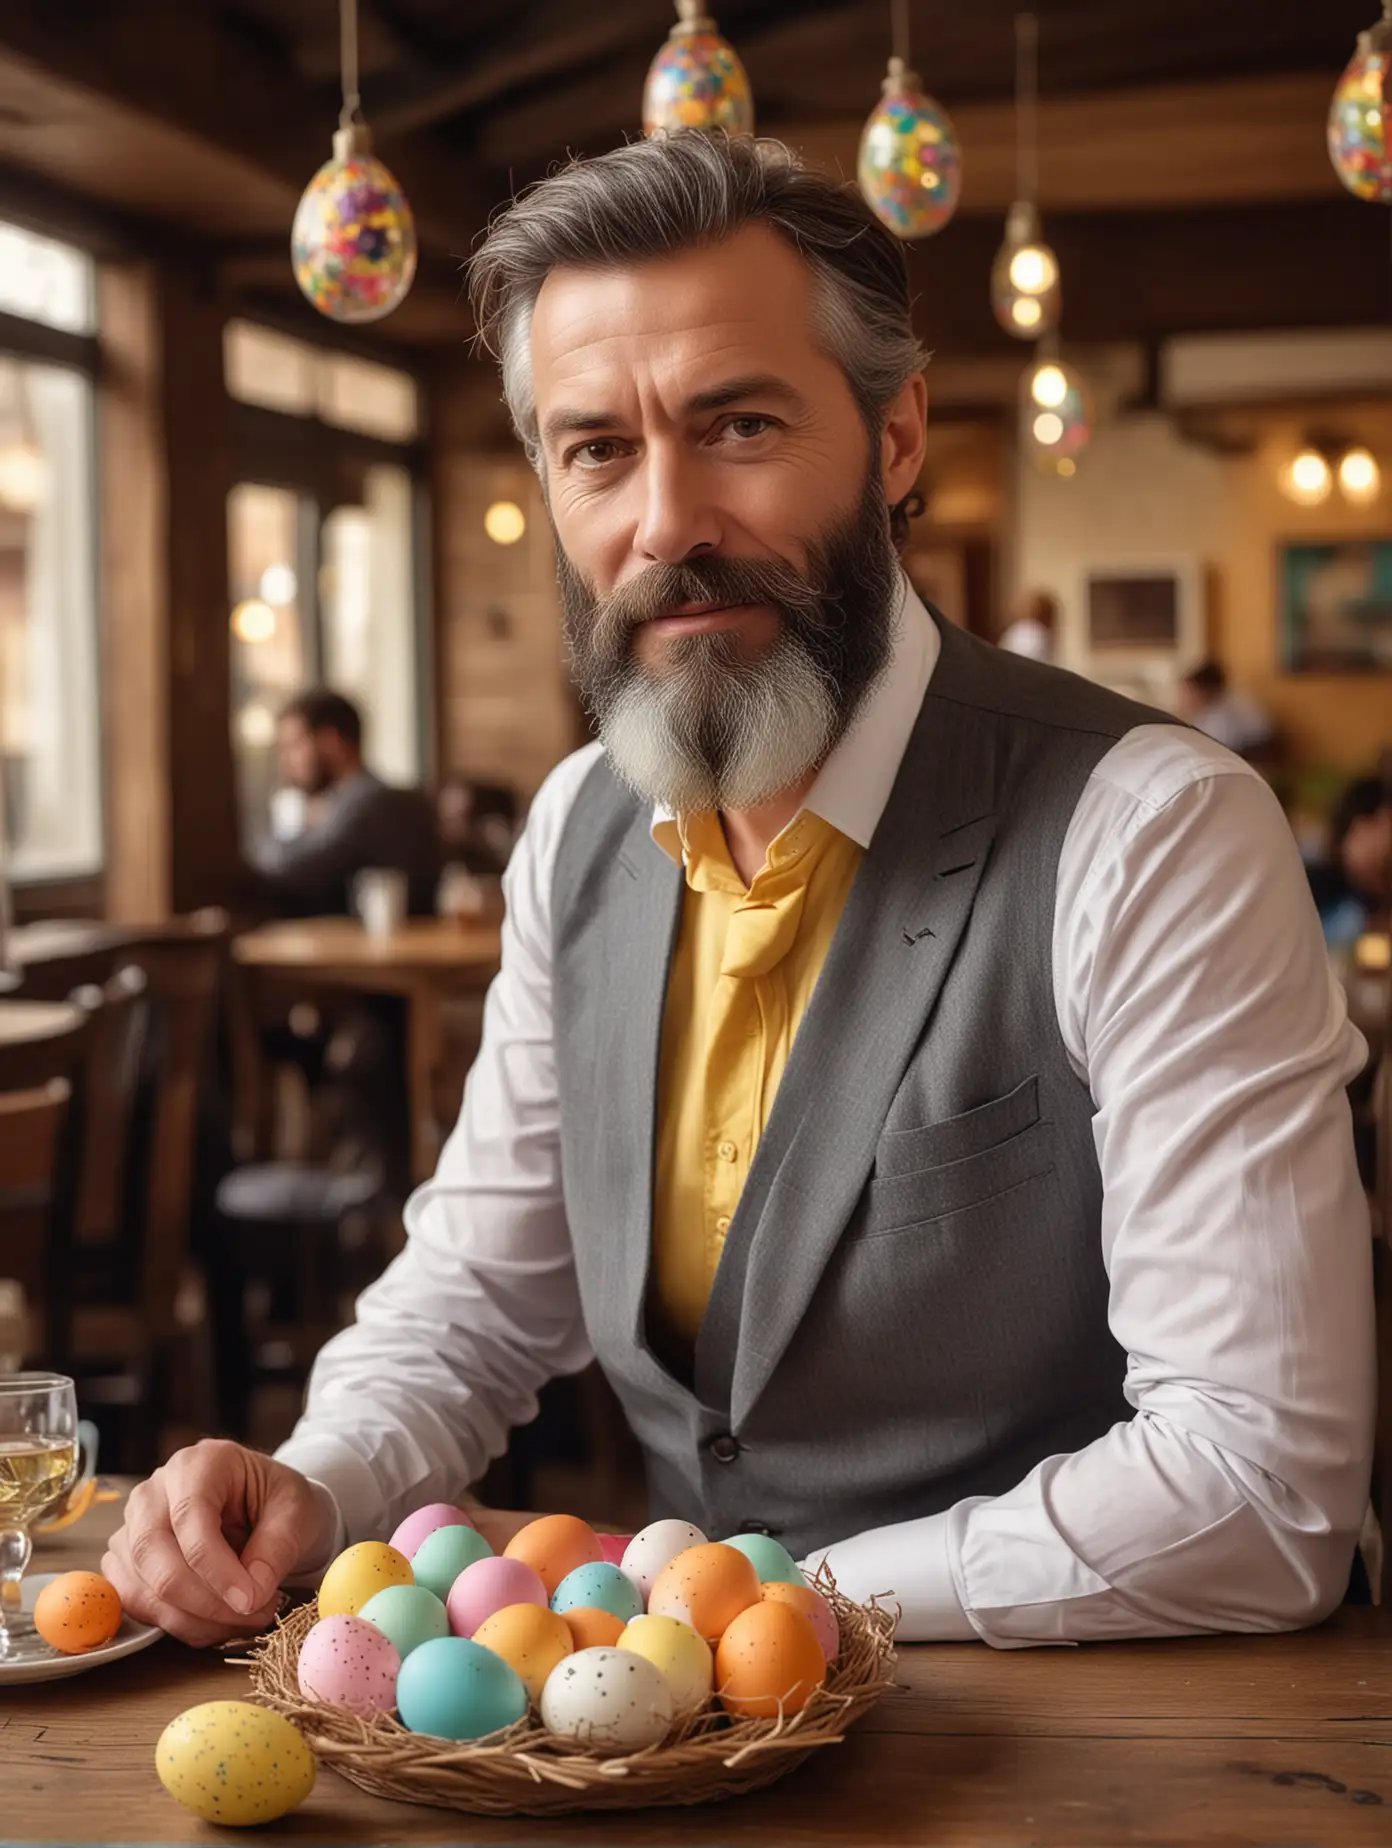 Elegant MiddleAged Man Celebrating Easter with Colorful Eggs